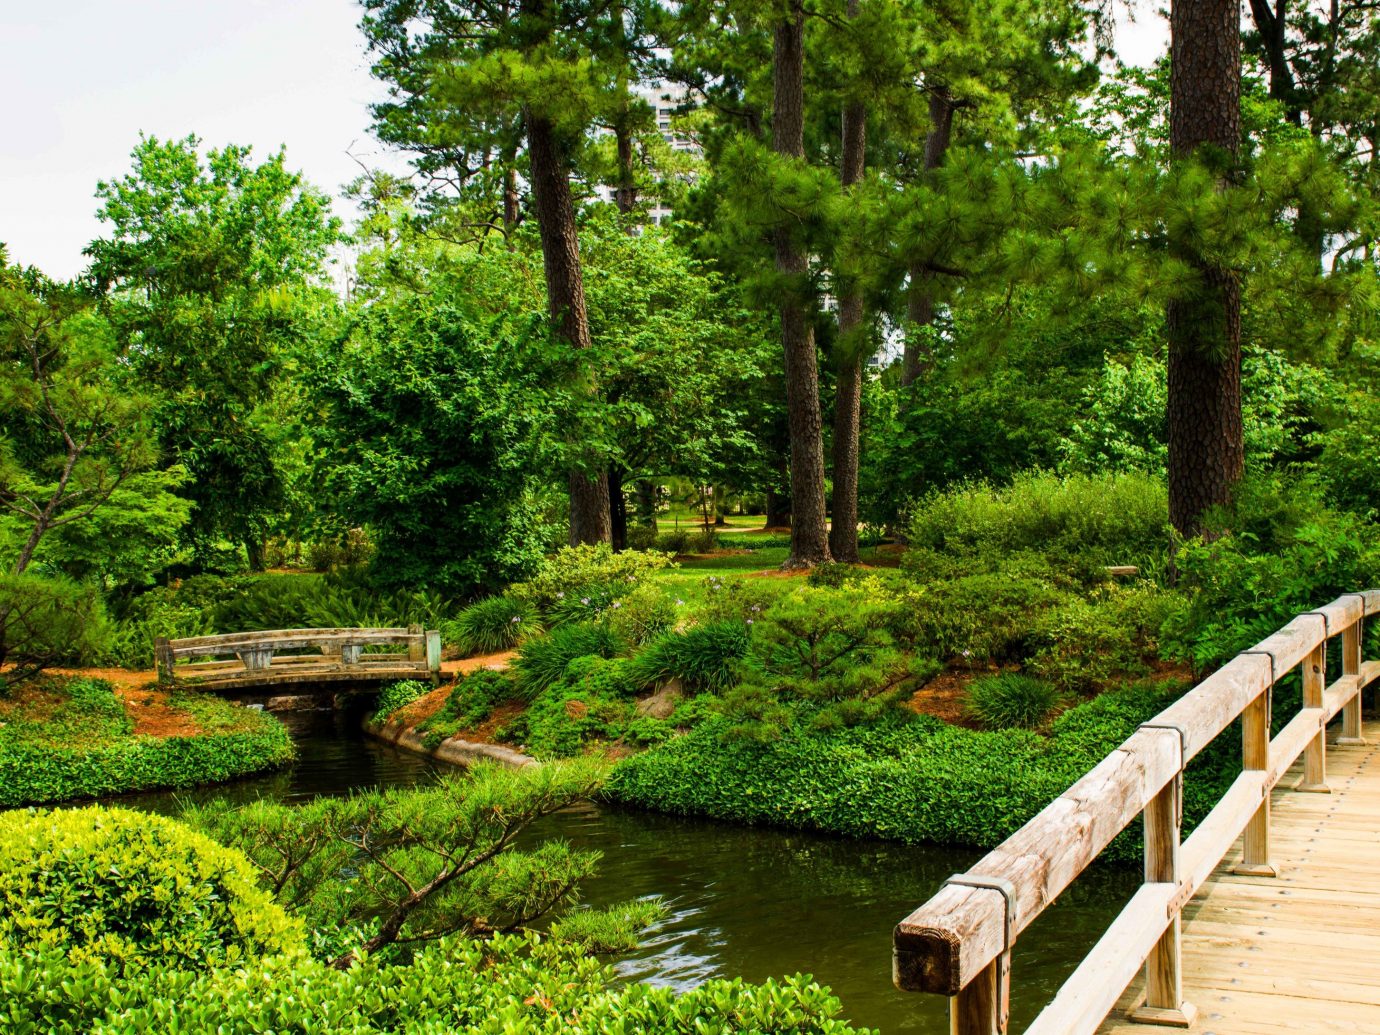 Houston Outdoors + Adventure Texas Trip Ideas tree outdoor bench grass Nature vegetation botanical garden Garden nature reserve park plant pond wooden water landscape wetland reflection bank landscaping watercourse riparian forest shrub bayou old growth forest walkway wood surrounded